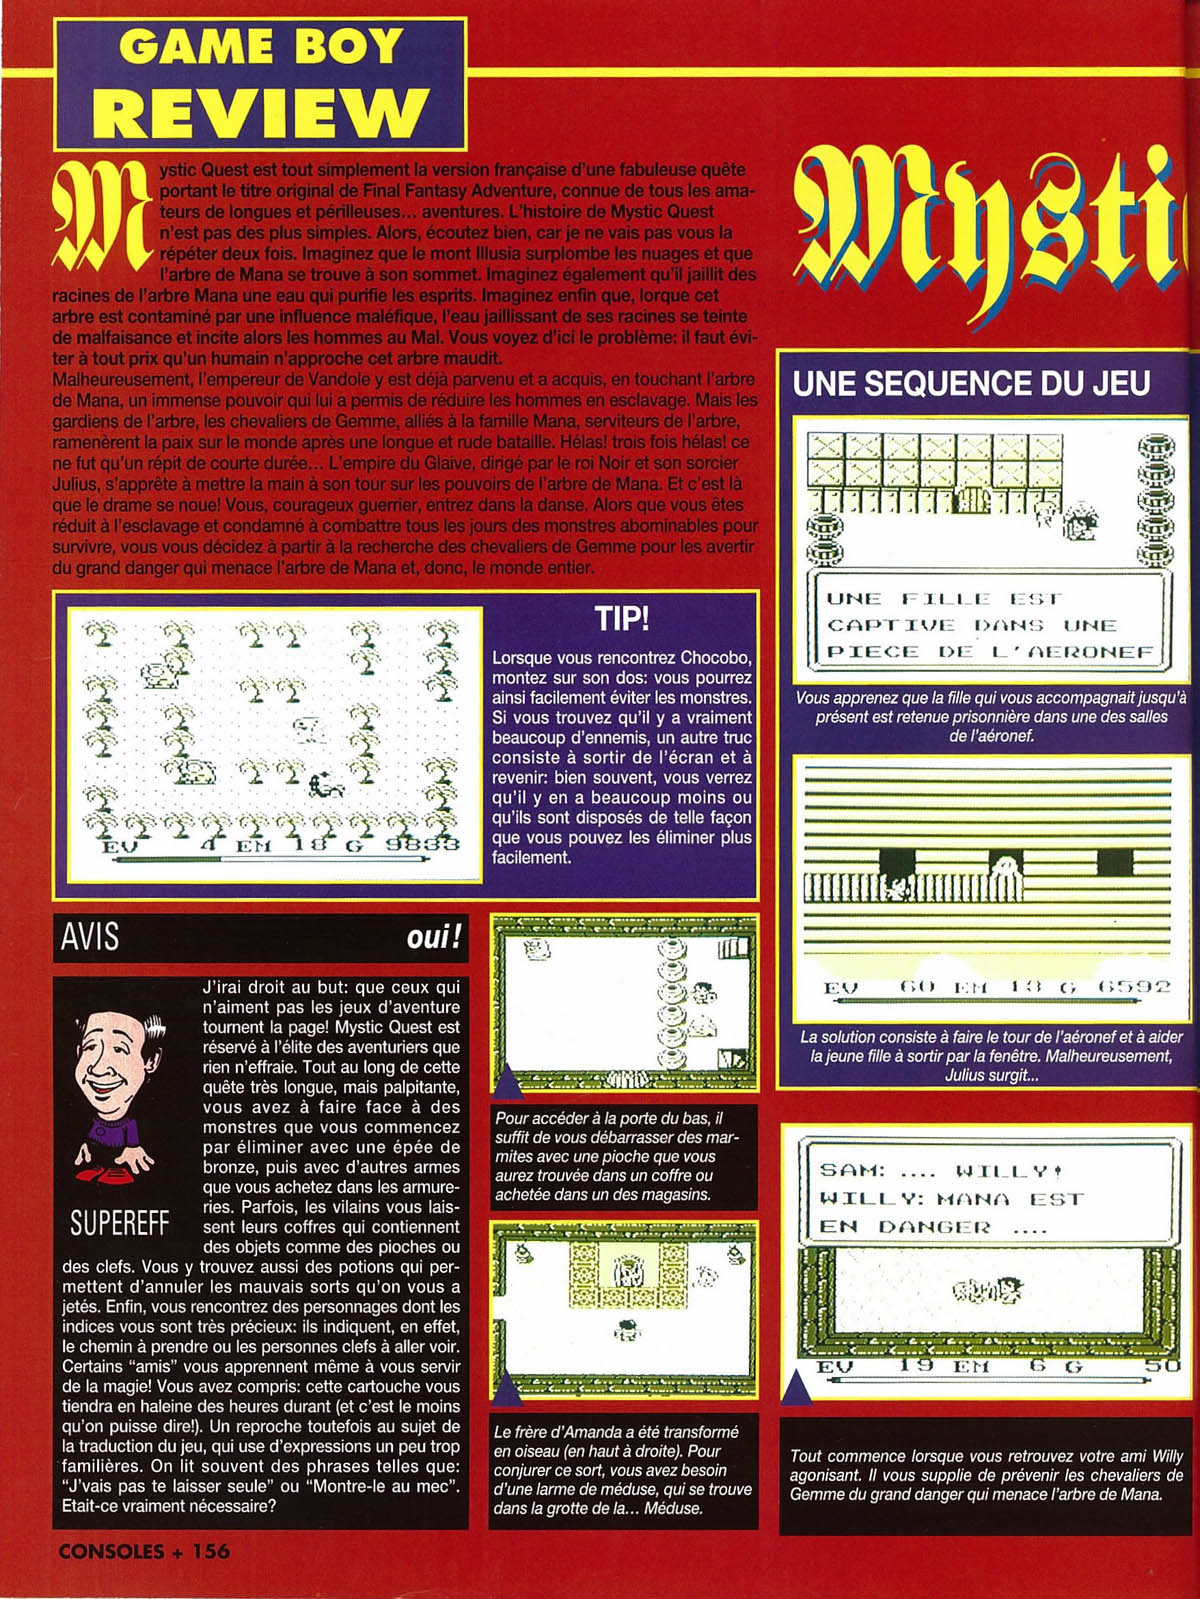 tests/765/Consoles + 023 - Page 156 (septembre 1993).jpg